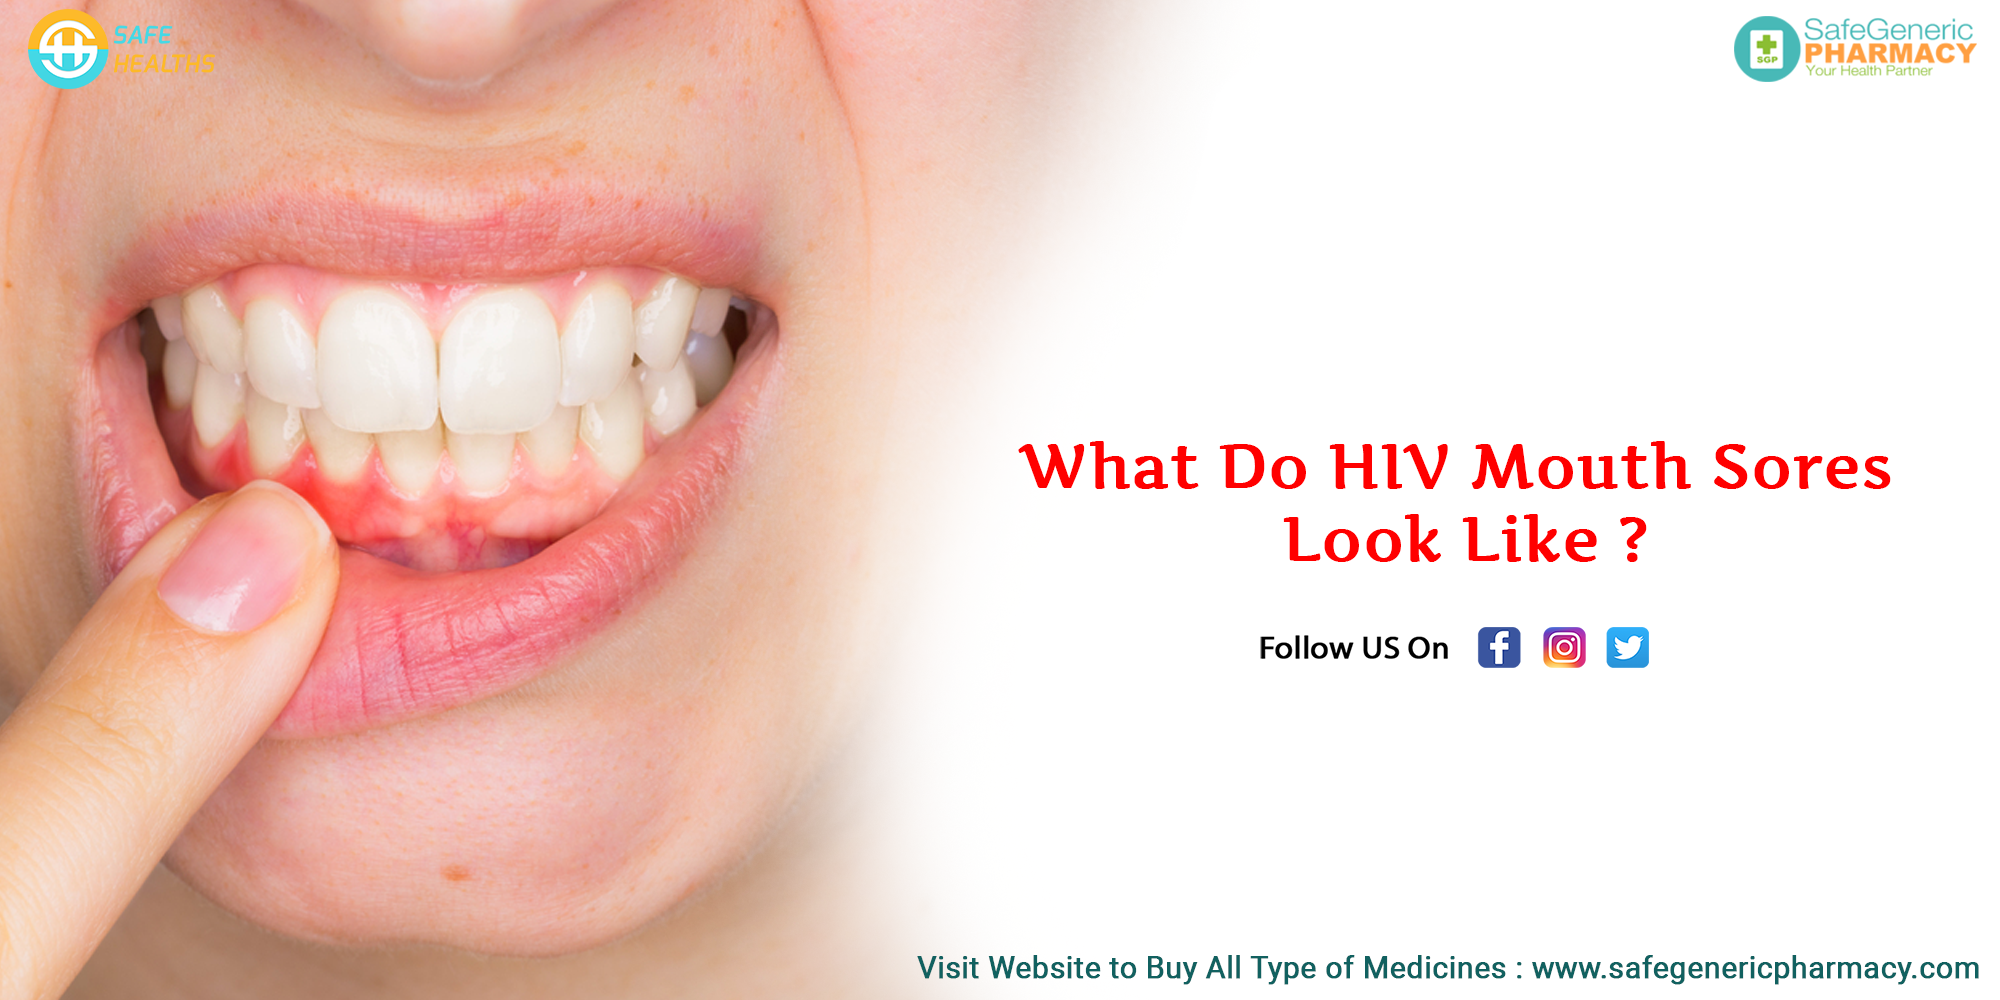 What Do HIV Mouth Sores Look Like?